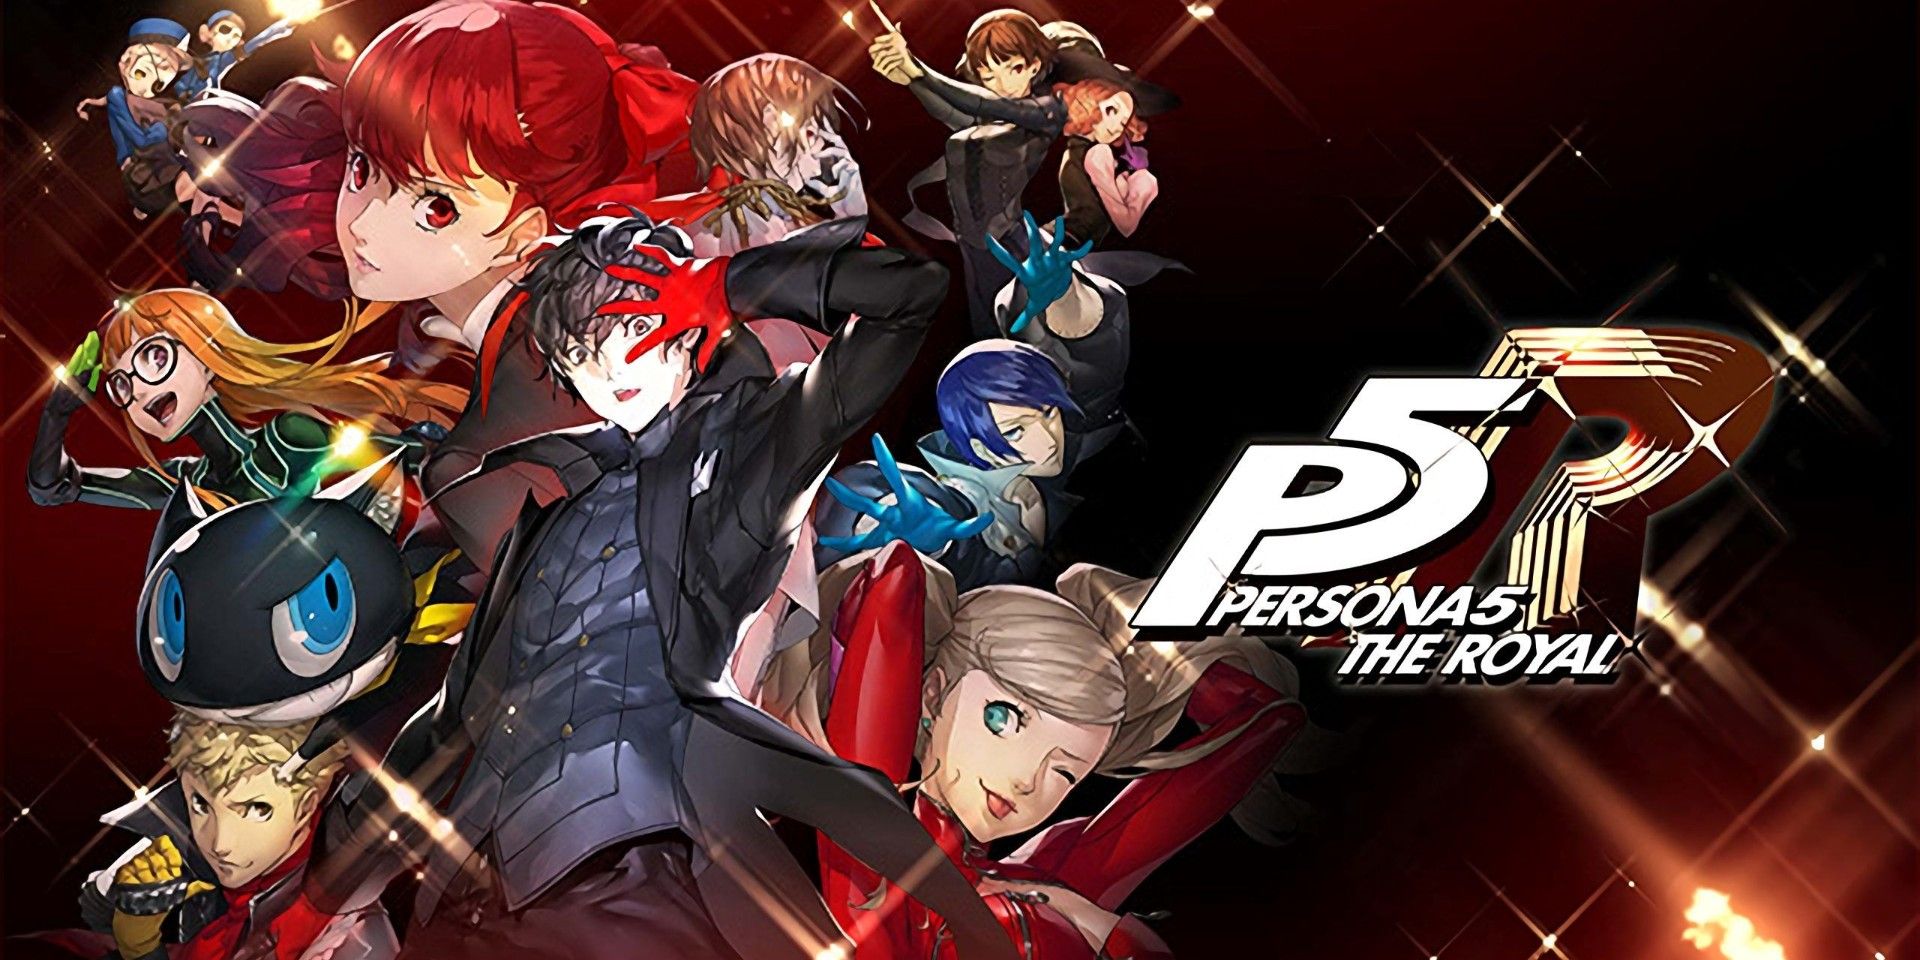 Differences From Persona 5/Royal